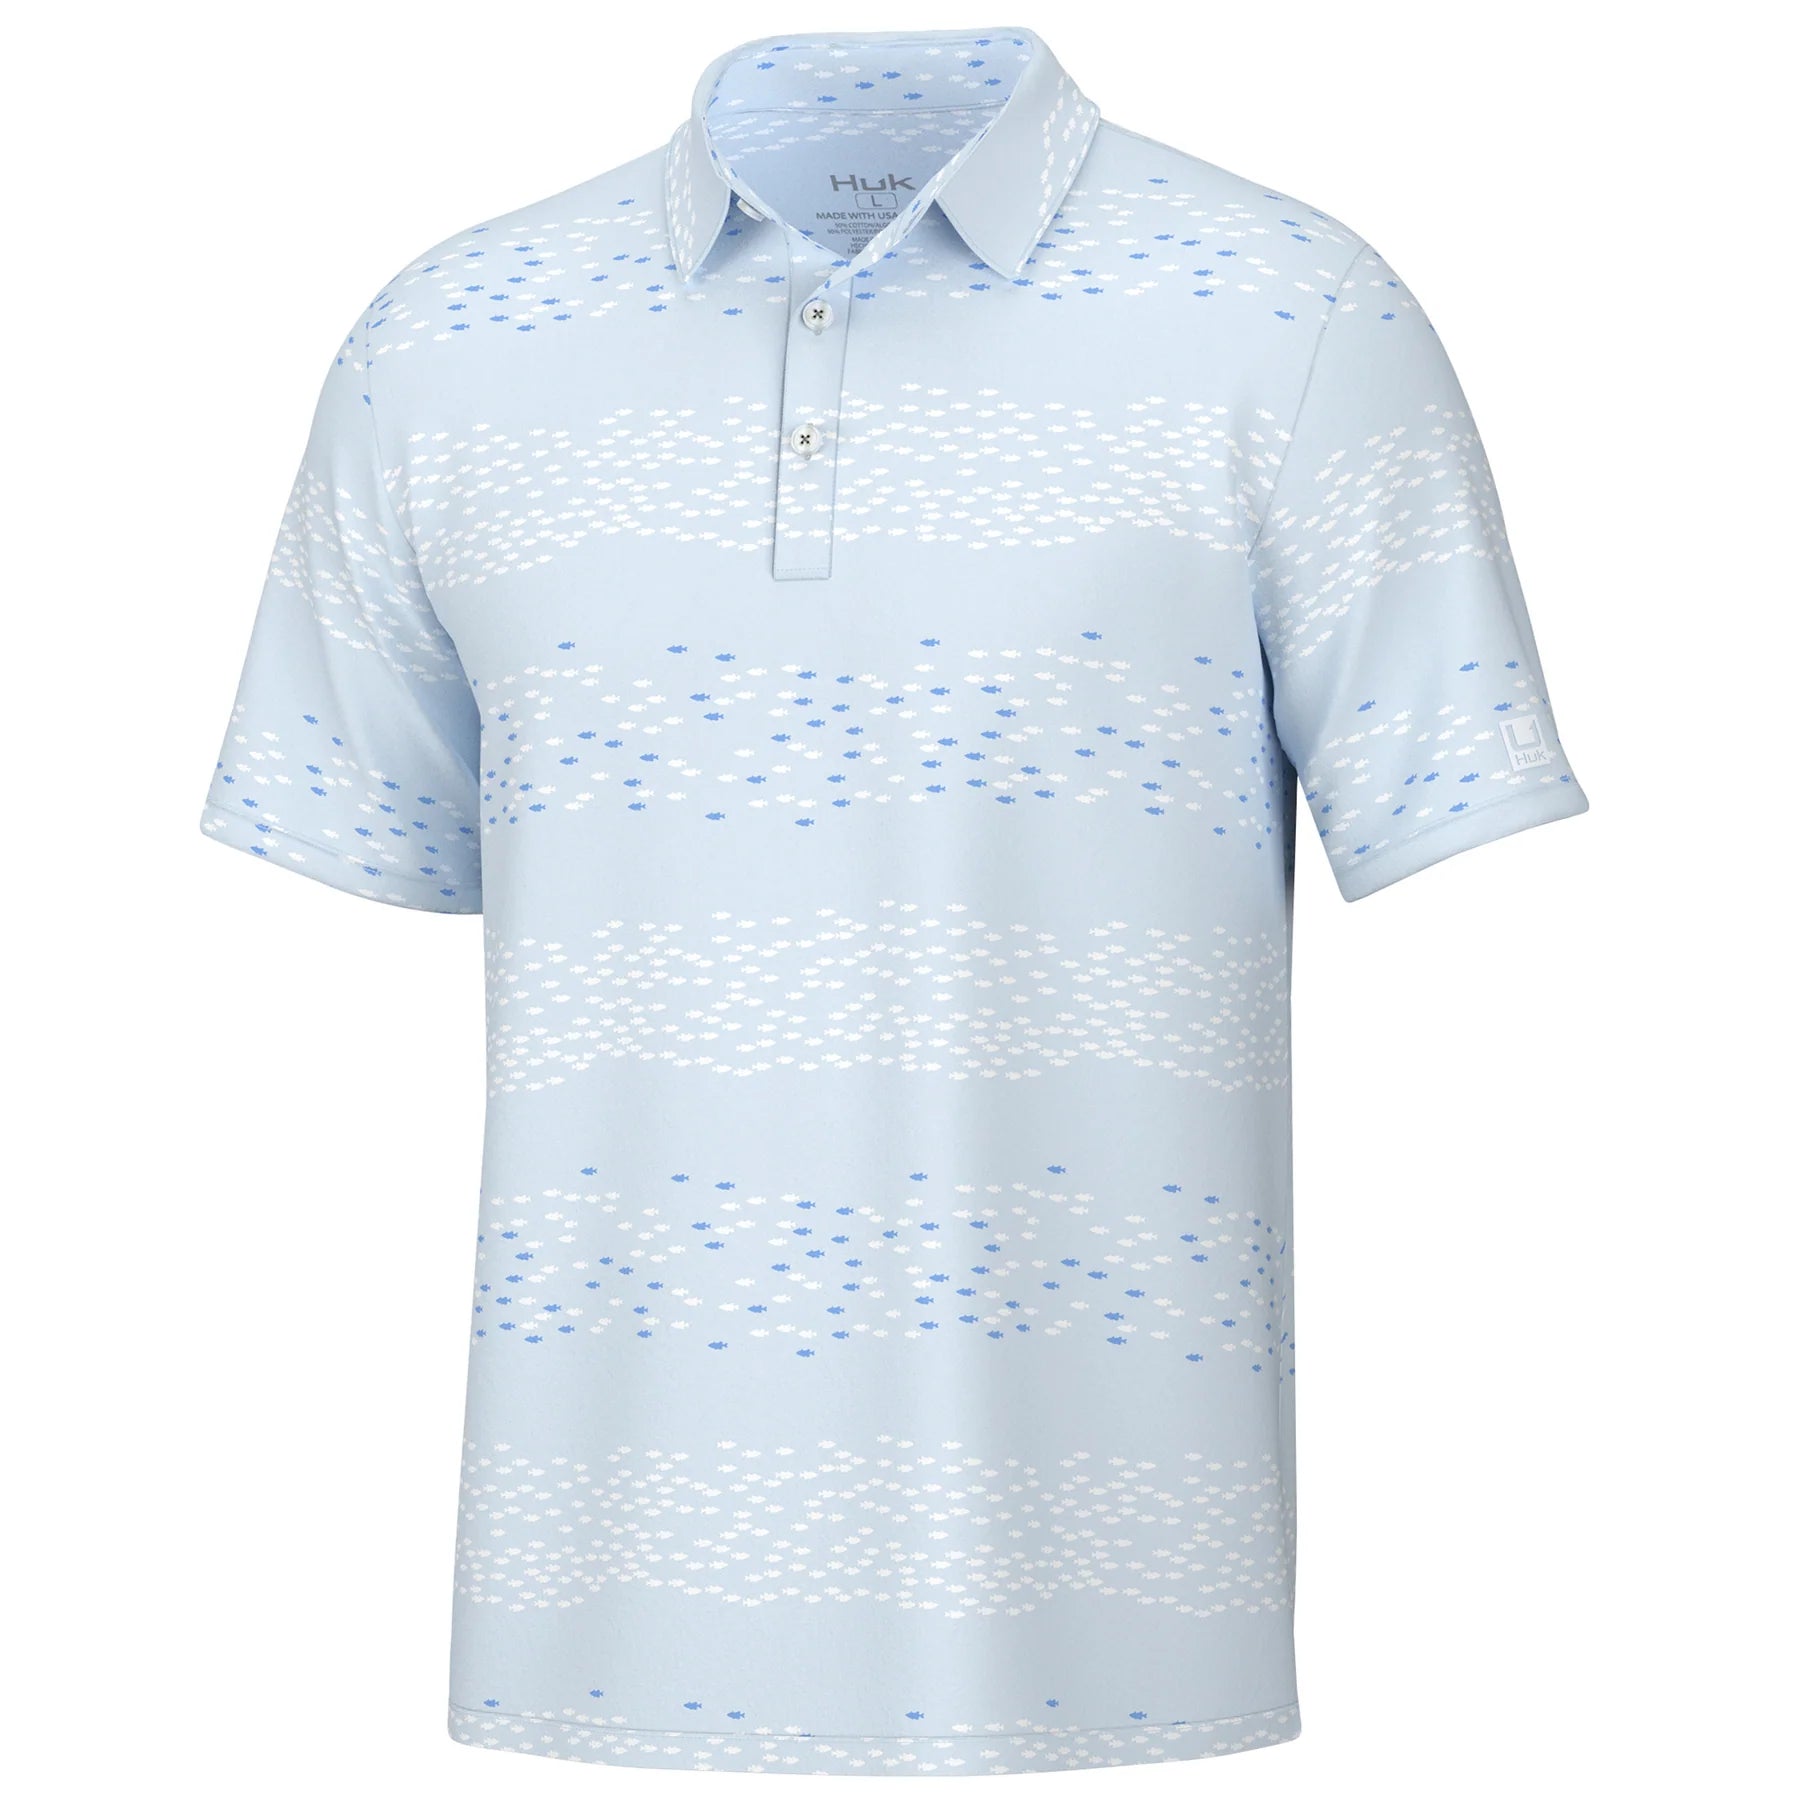 HUK FISHING Men's Polo ICE WATER / M Huk Pursuit Performance Polo || David's Clothing H1200603476